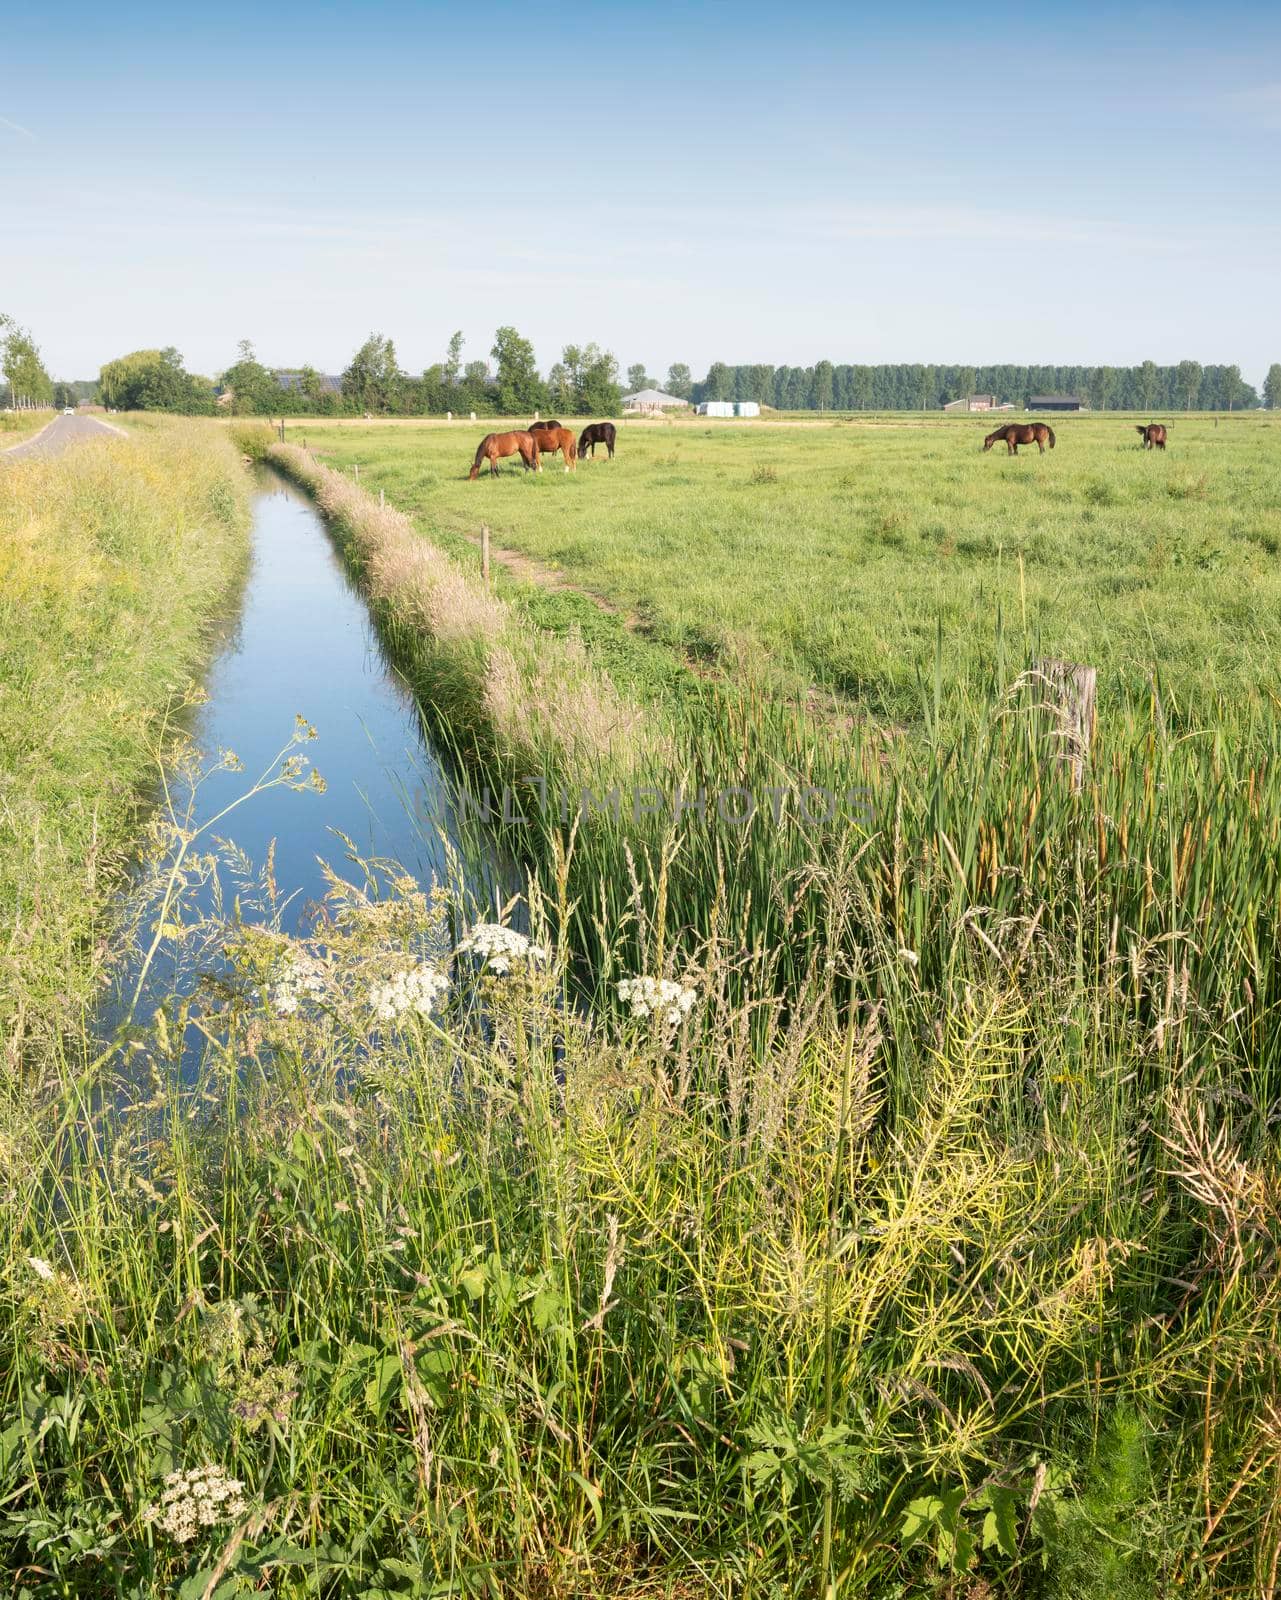 horses and canal in green meadow countryside near nijmegen in the netherlands under blue sky in summer